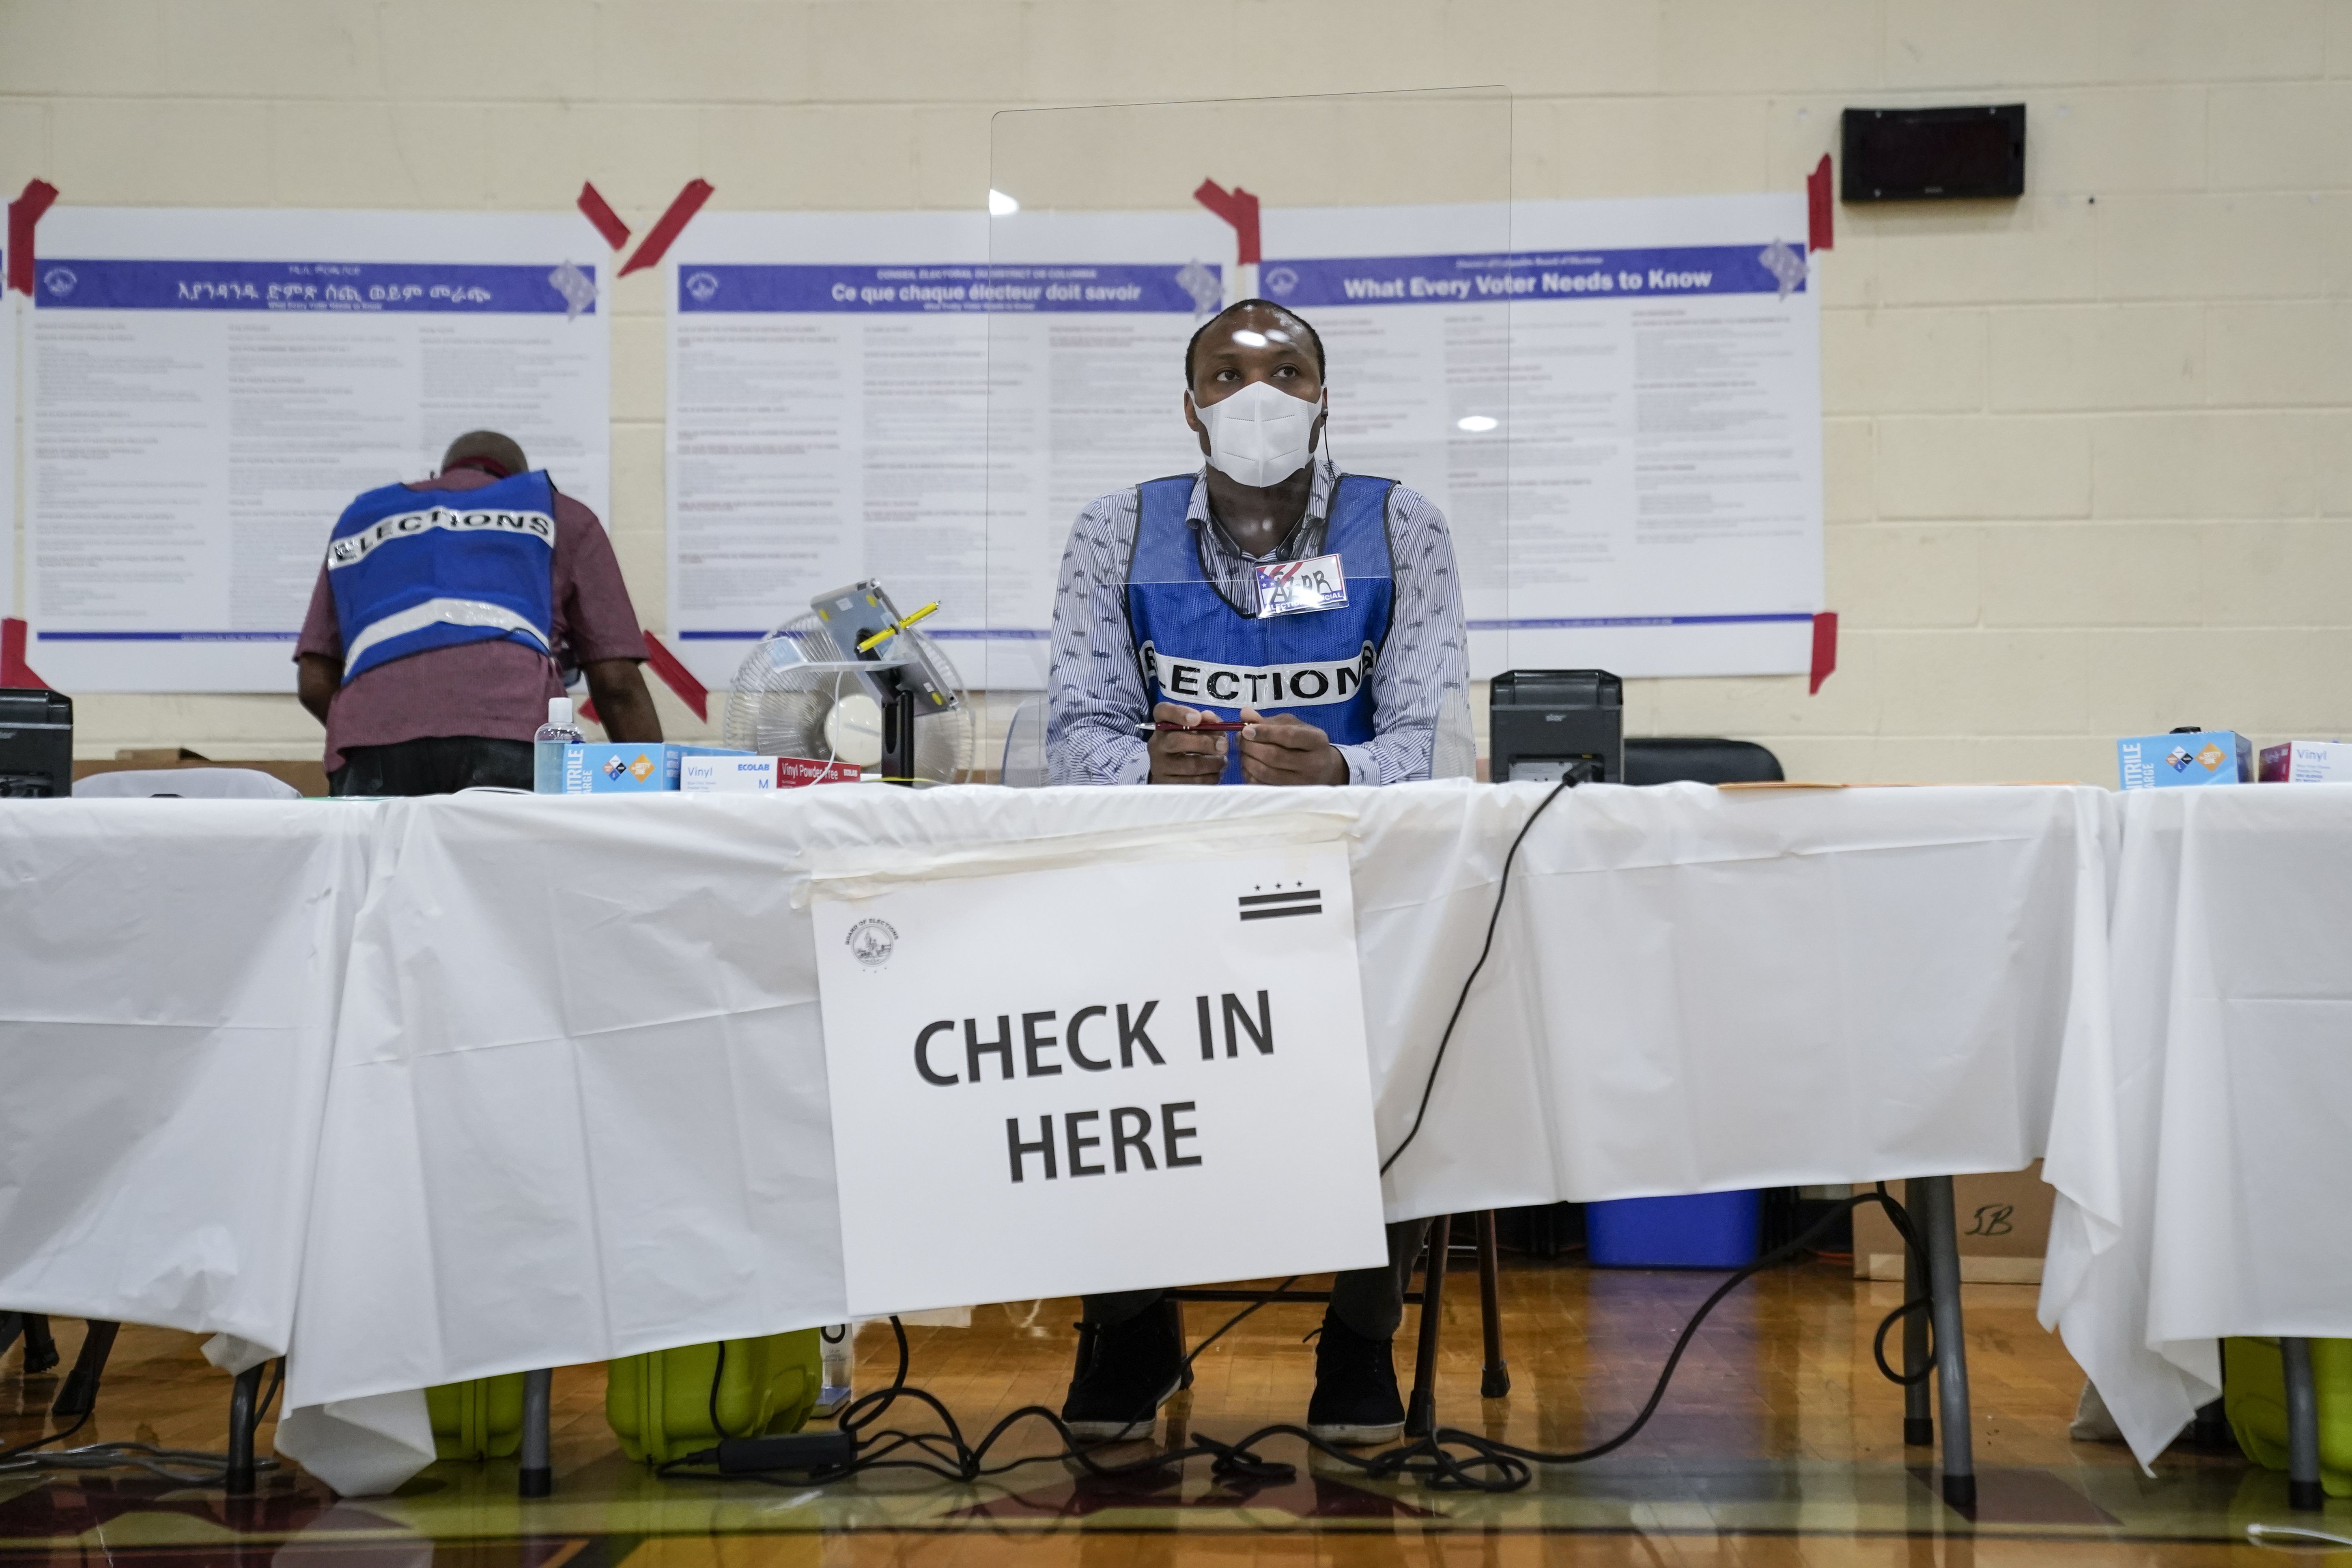 A woman sits at a table with a banquet sheet over it while wearing a face mask. A sign on the table reads "check in here"